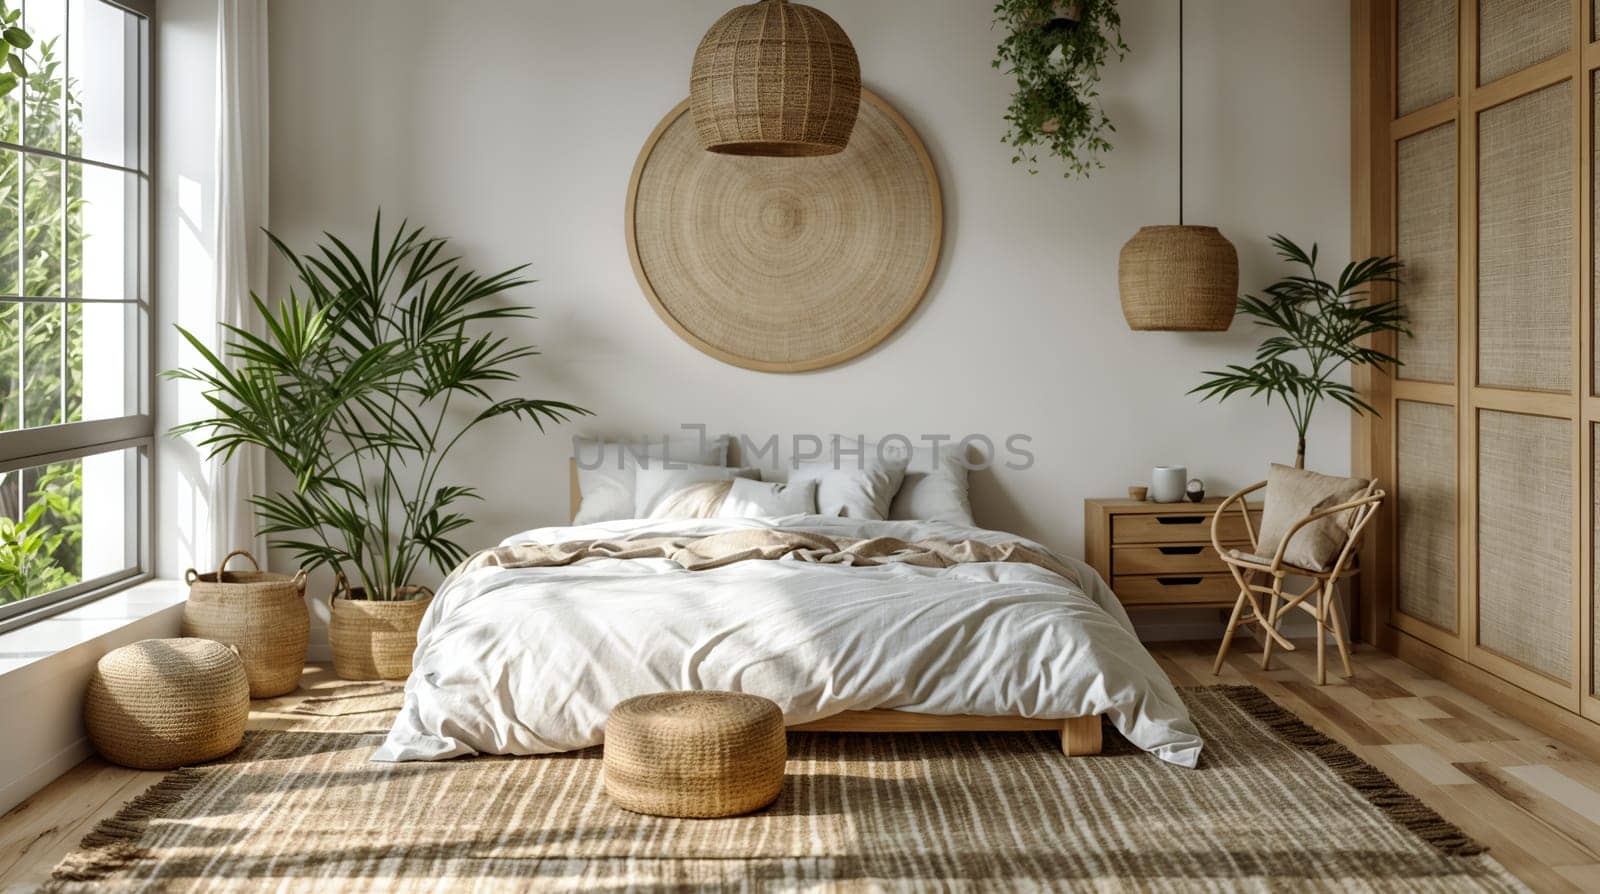 Sunny scandinavian Bedroom With Natural Decor Elements by chrisroll